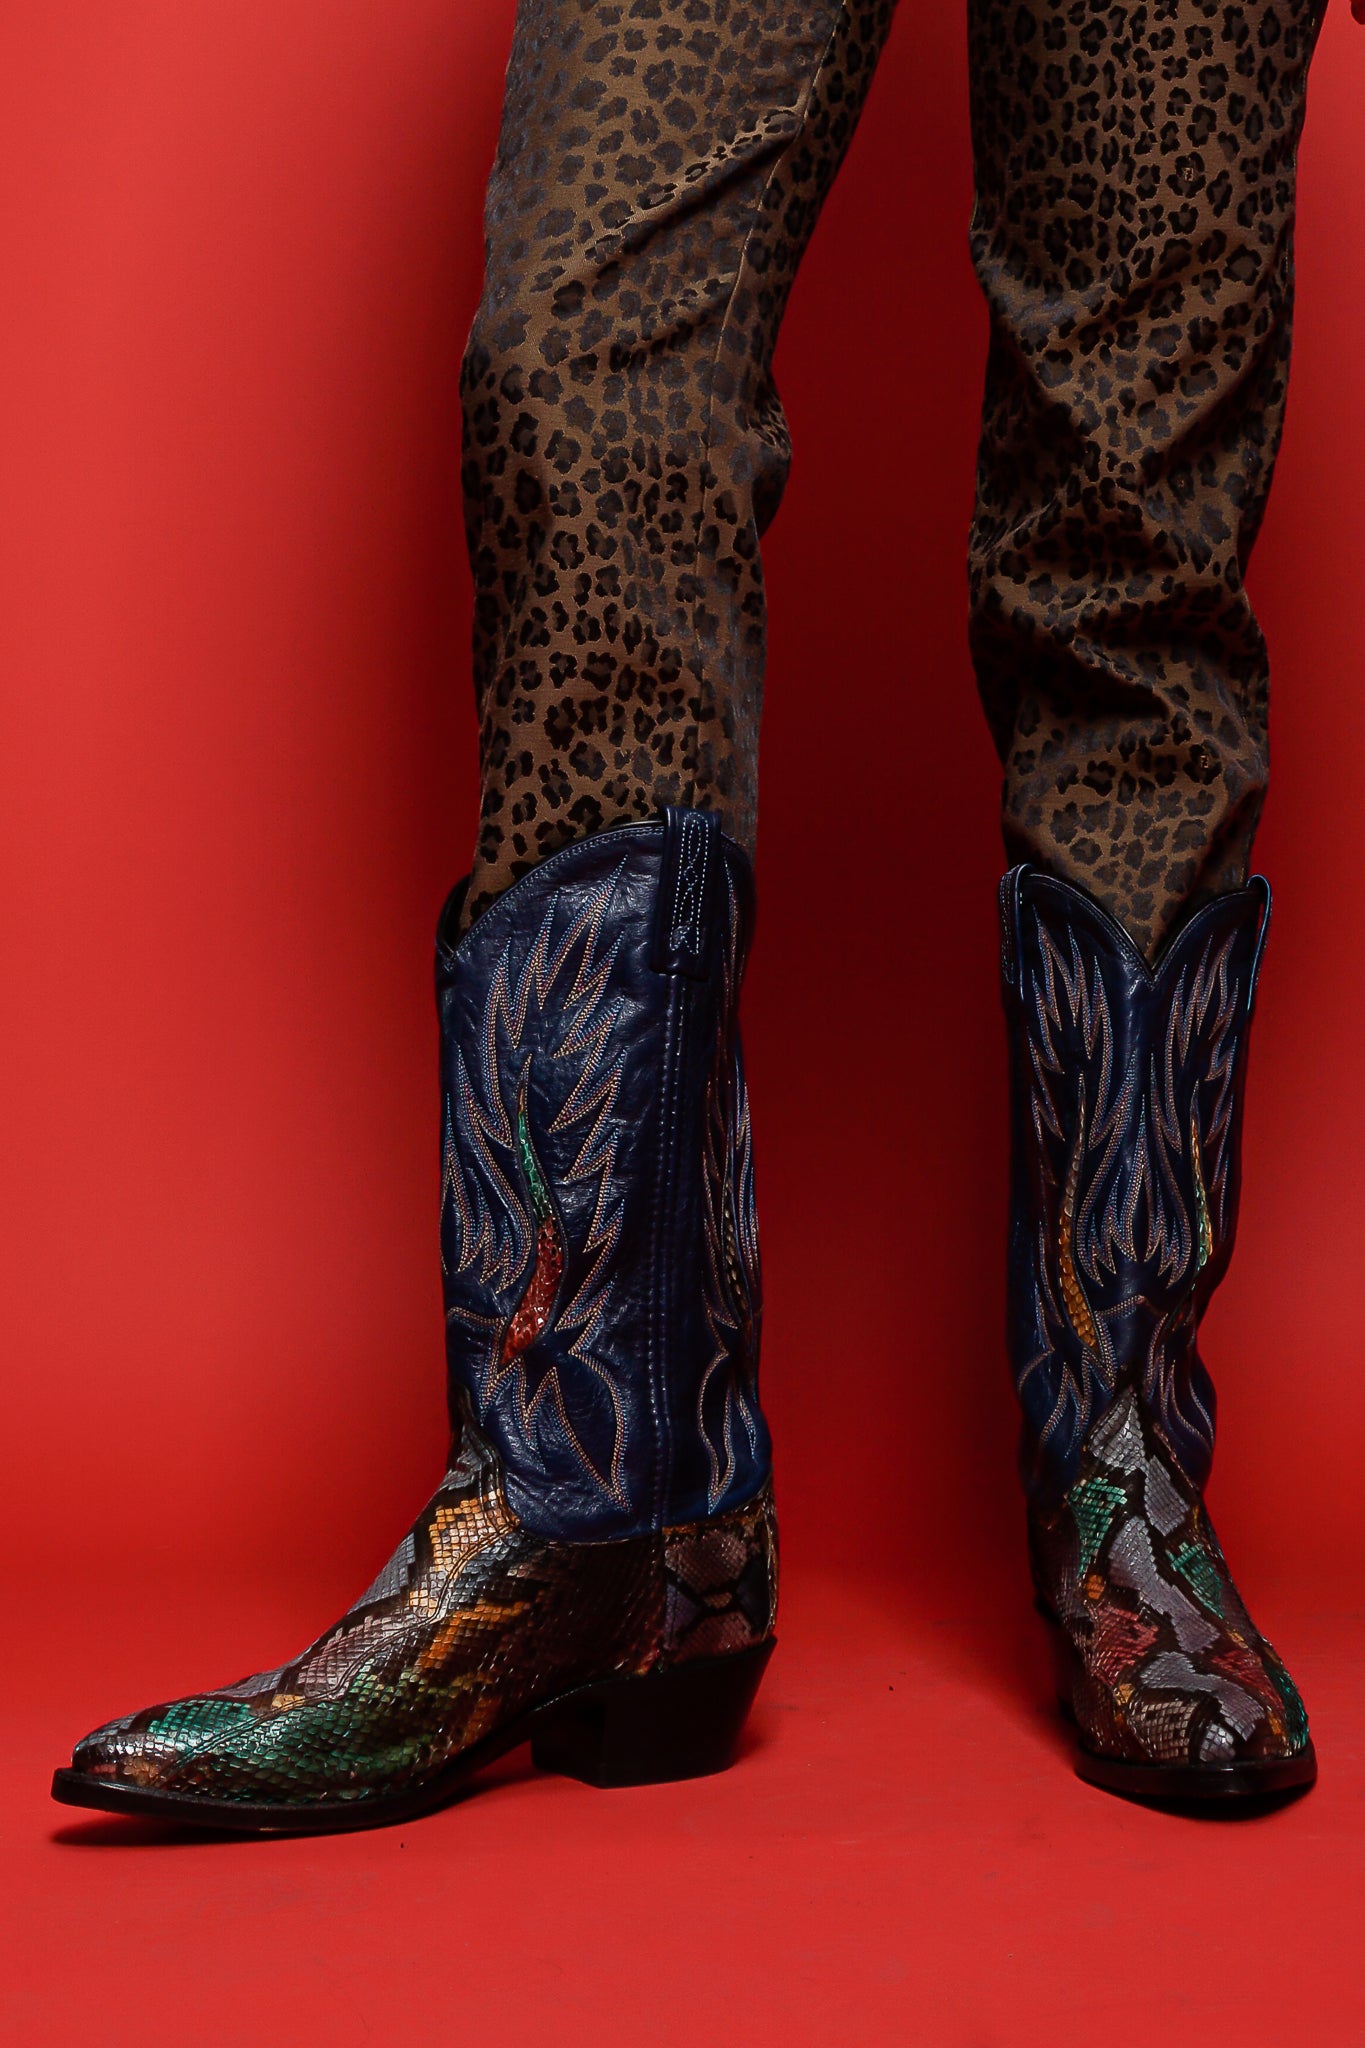 Fendi animal pant and multicolor snakeskin flame boots on red background at Recess Los Angeles